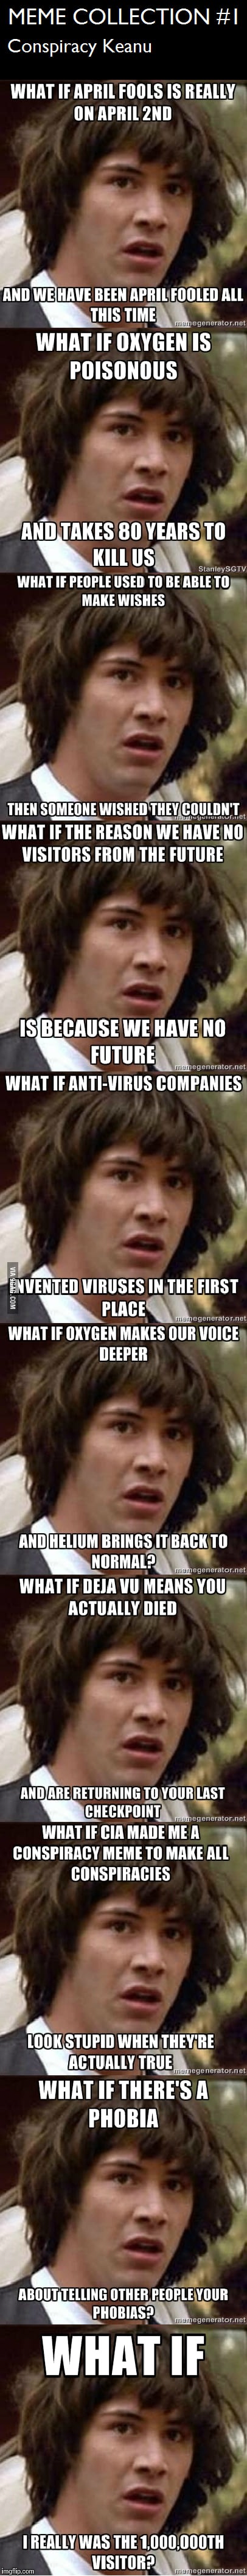 I liked this meme collection so I'll post it here (not made by me) | image tagged in memes,conspiracy keanu,meme collection,9gag,keanu reeves,what if | made w/ Imgflip meme maker